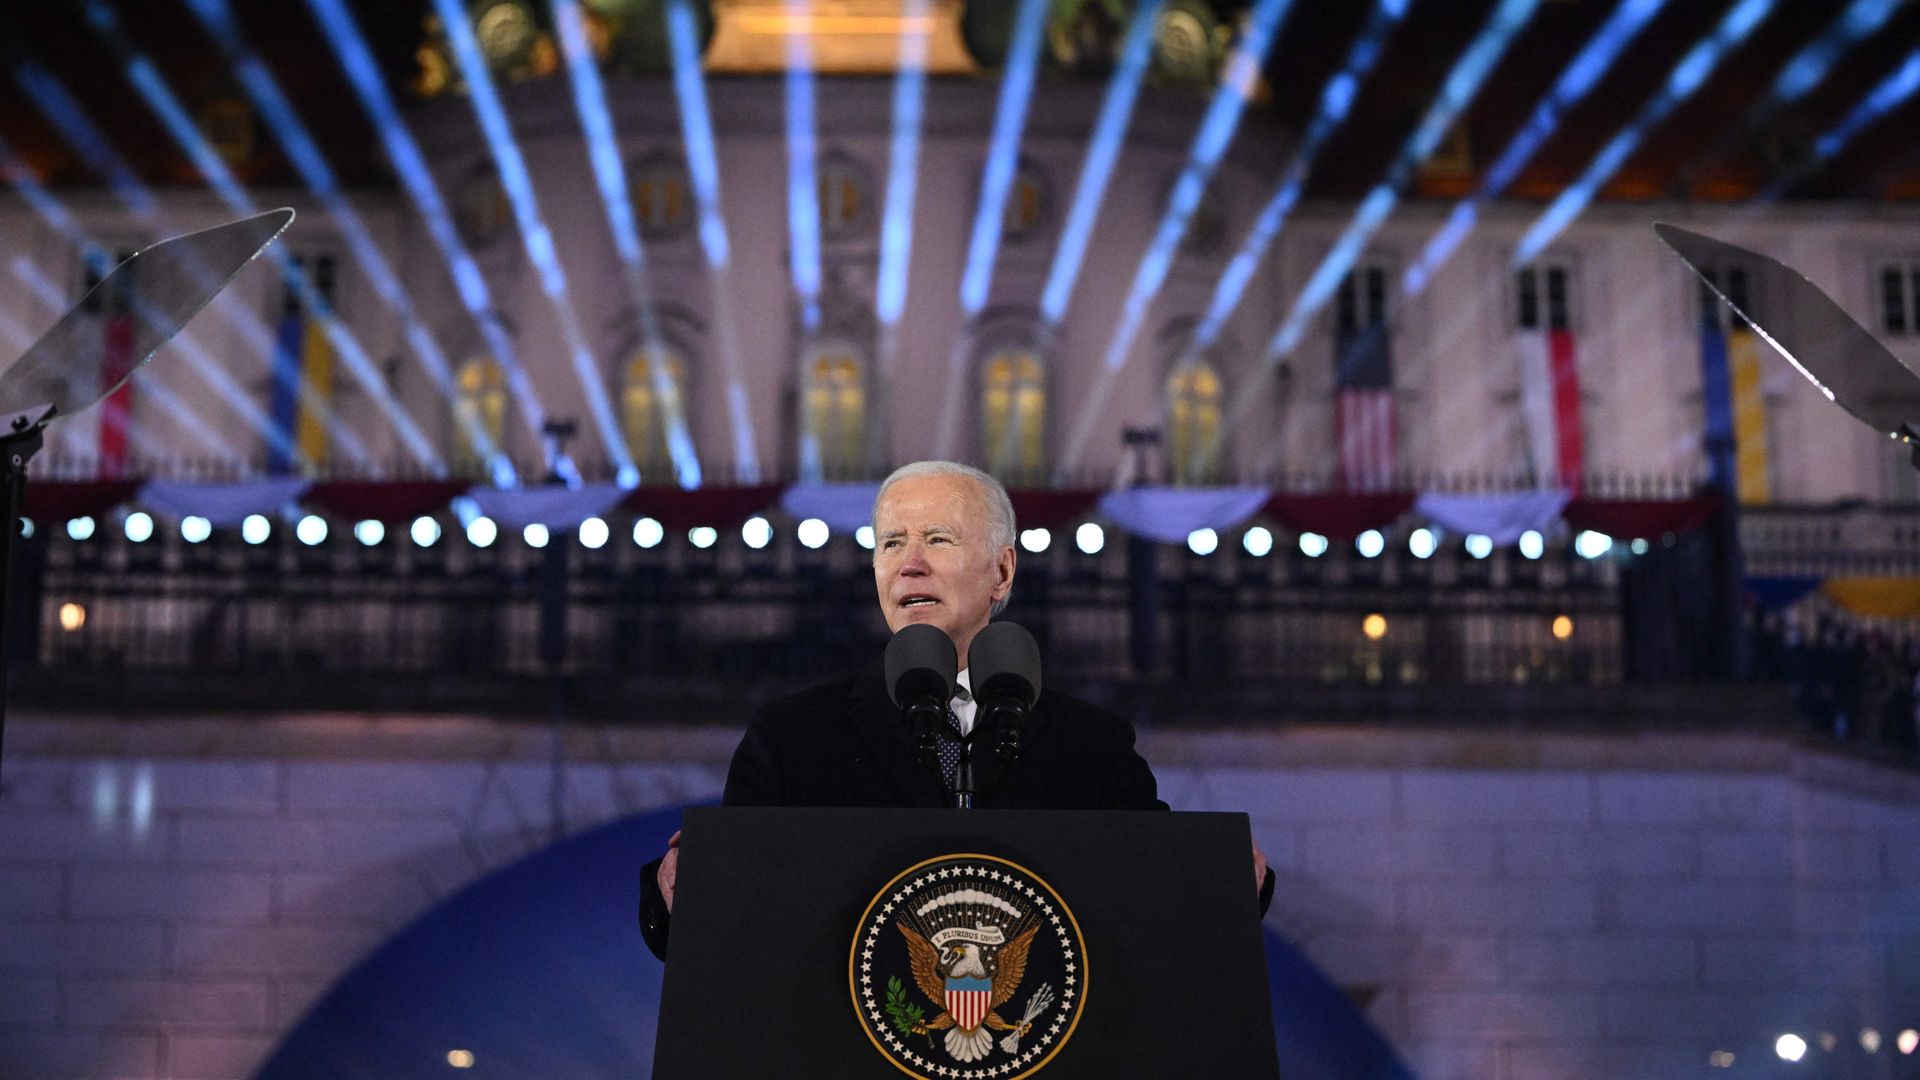 US President Joe Biden delivers a speech at the Royal Warsaw Castle Gardens in Warsaw on February 21, 2023.